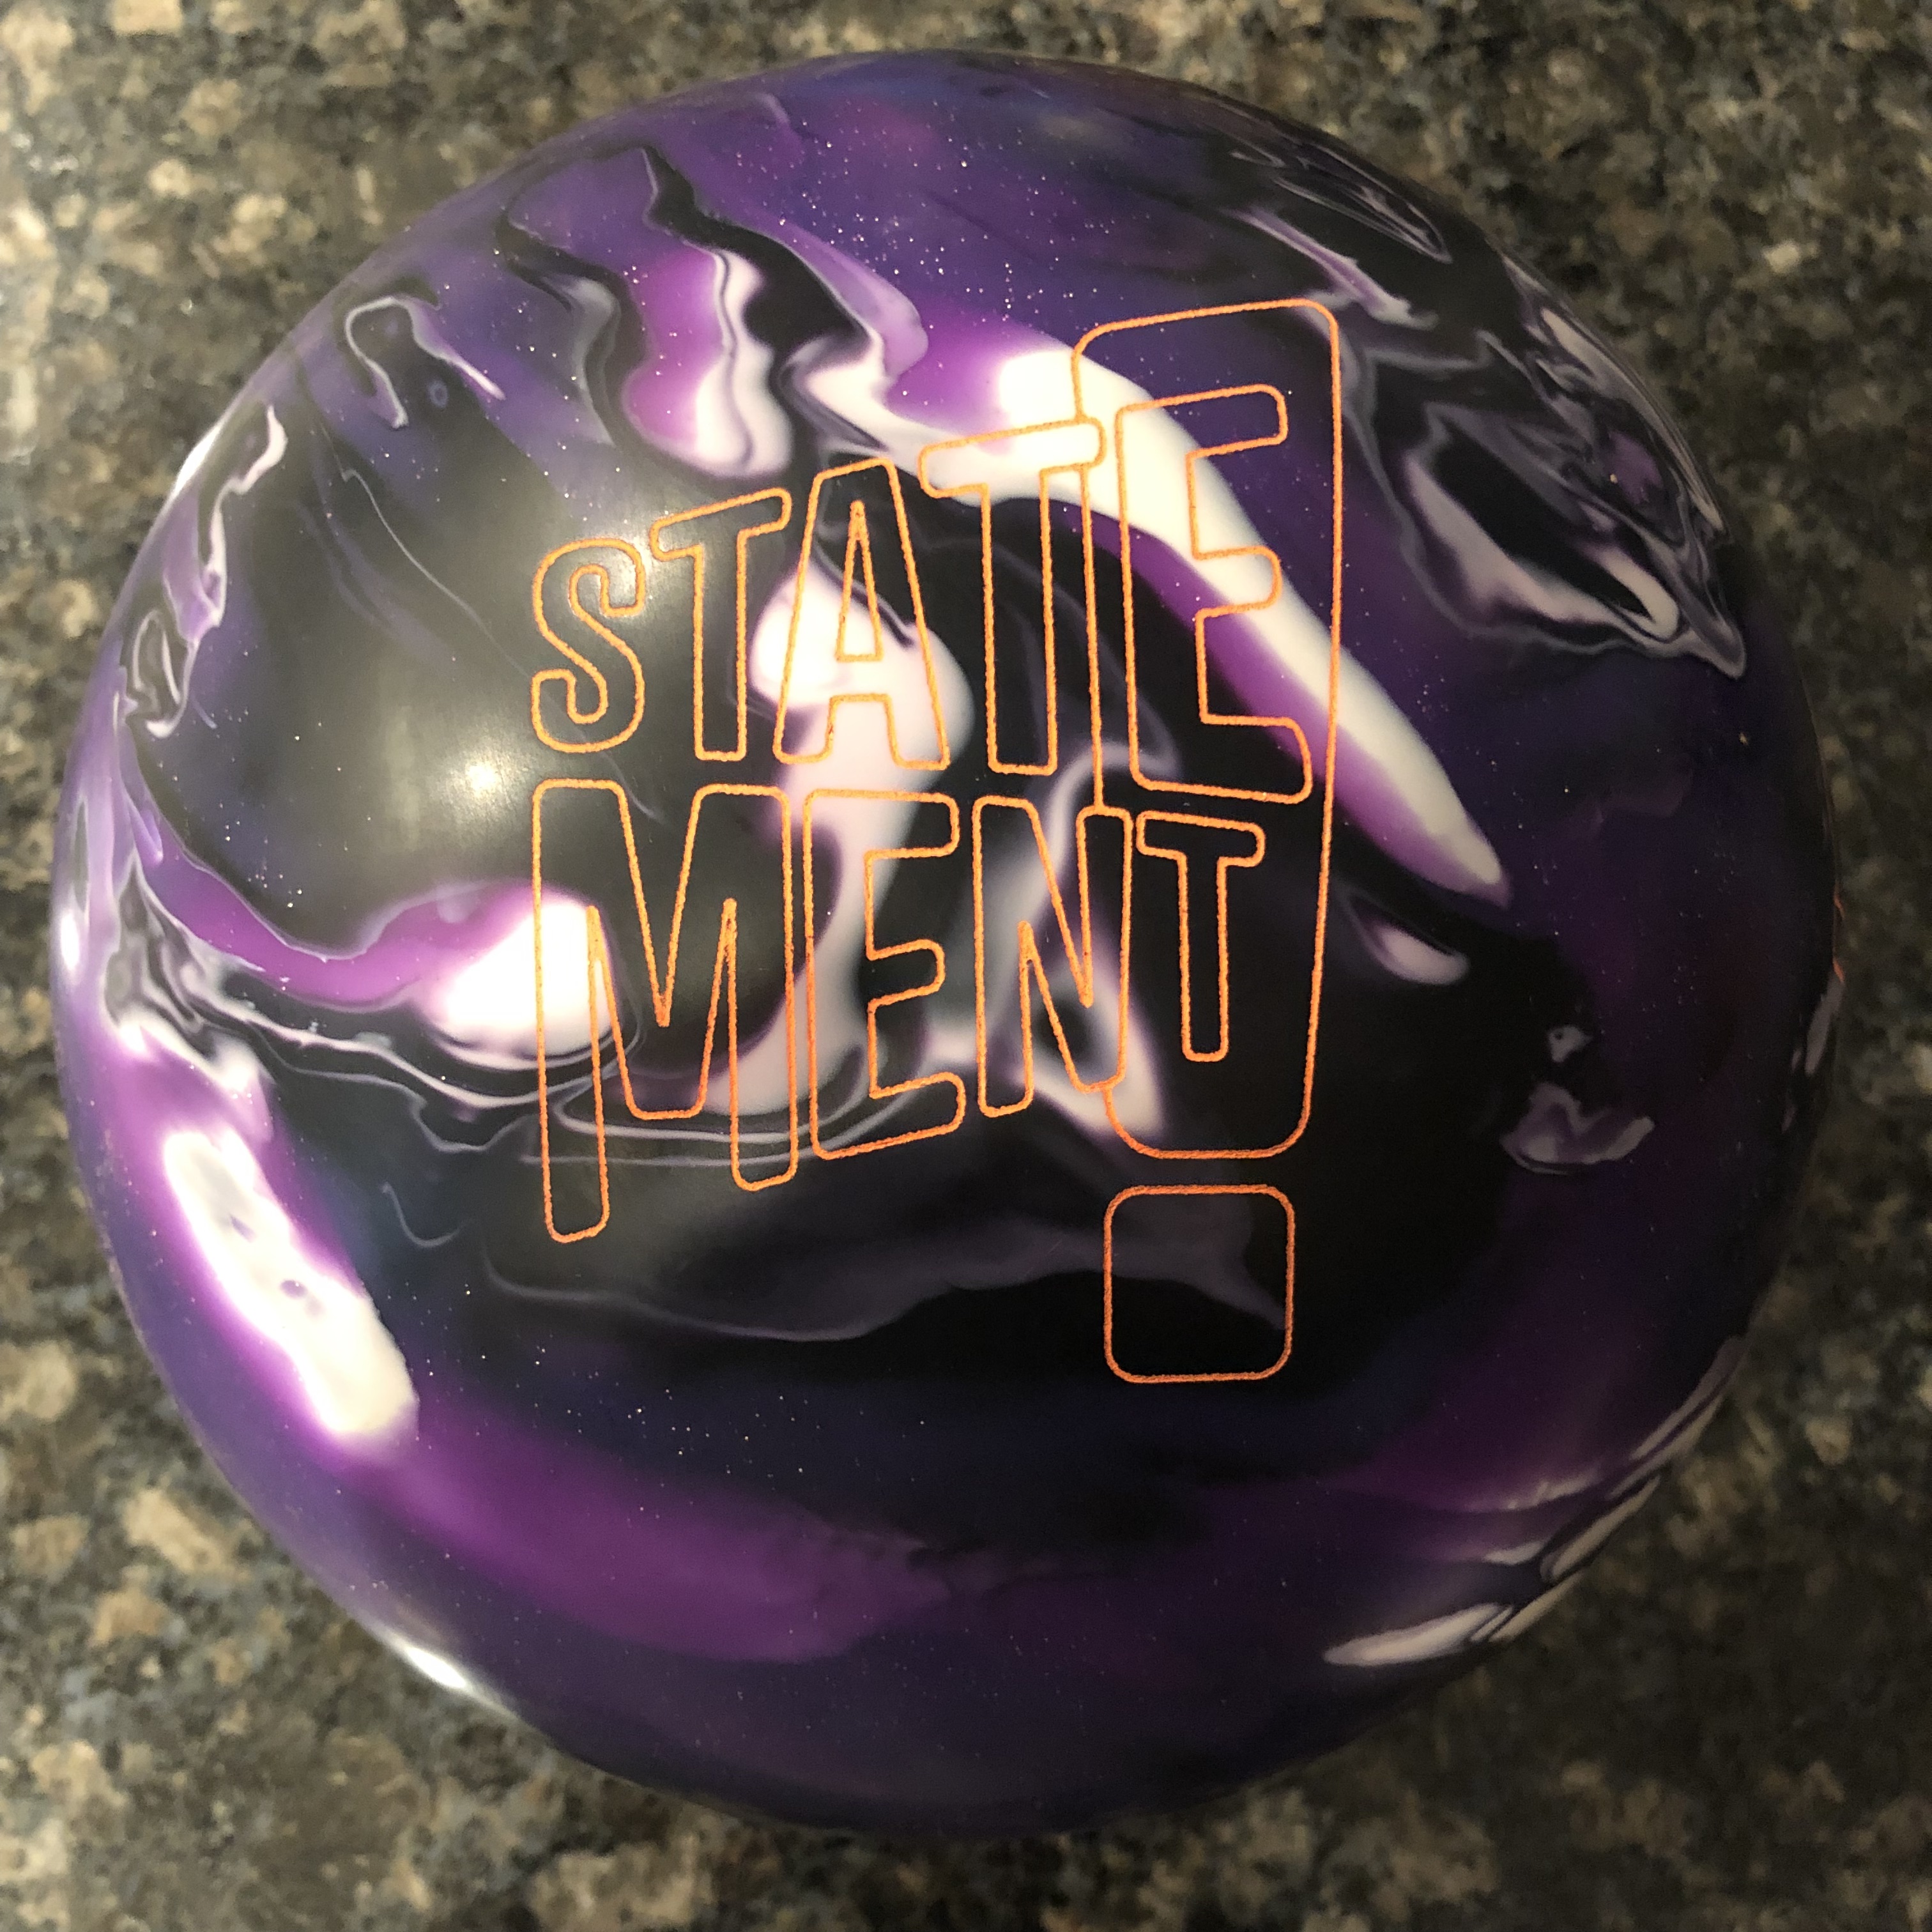 Hammer Statement Bowling Ball Review | Tamer Bowling